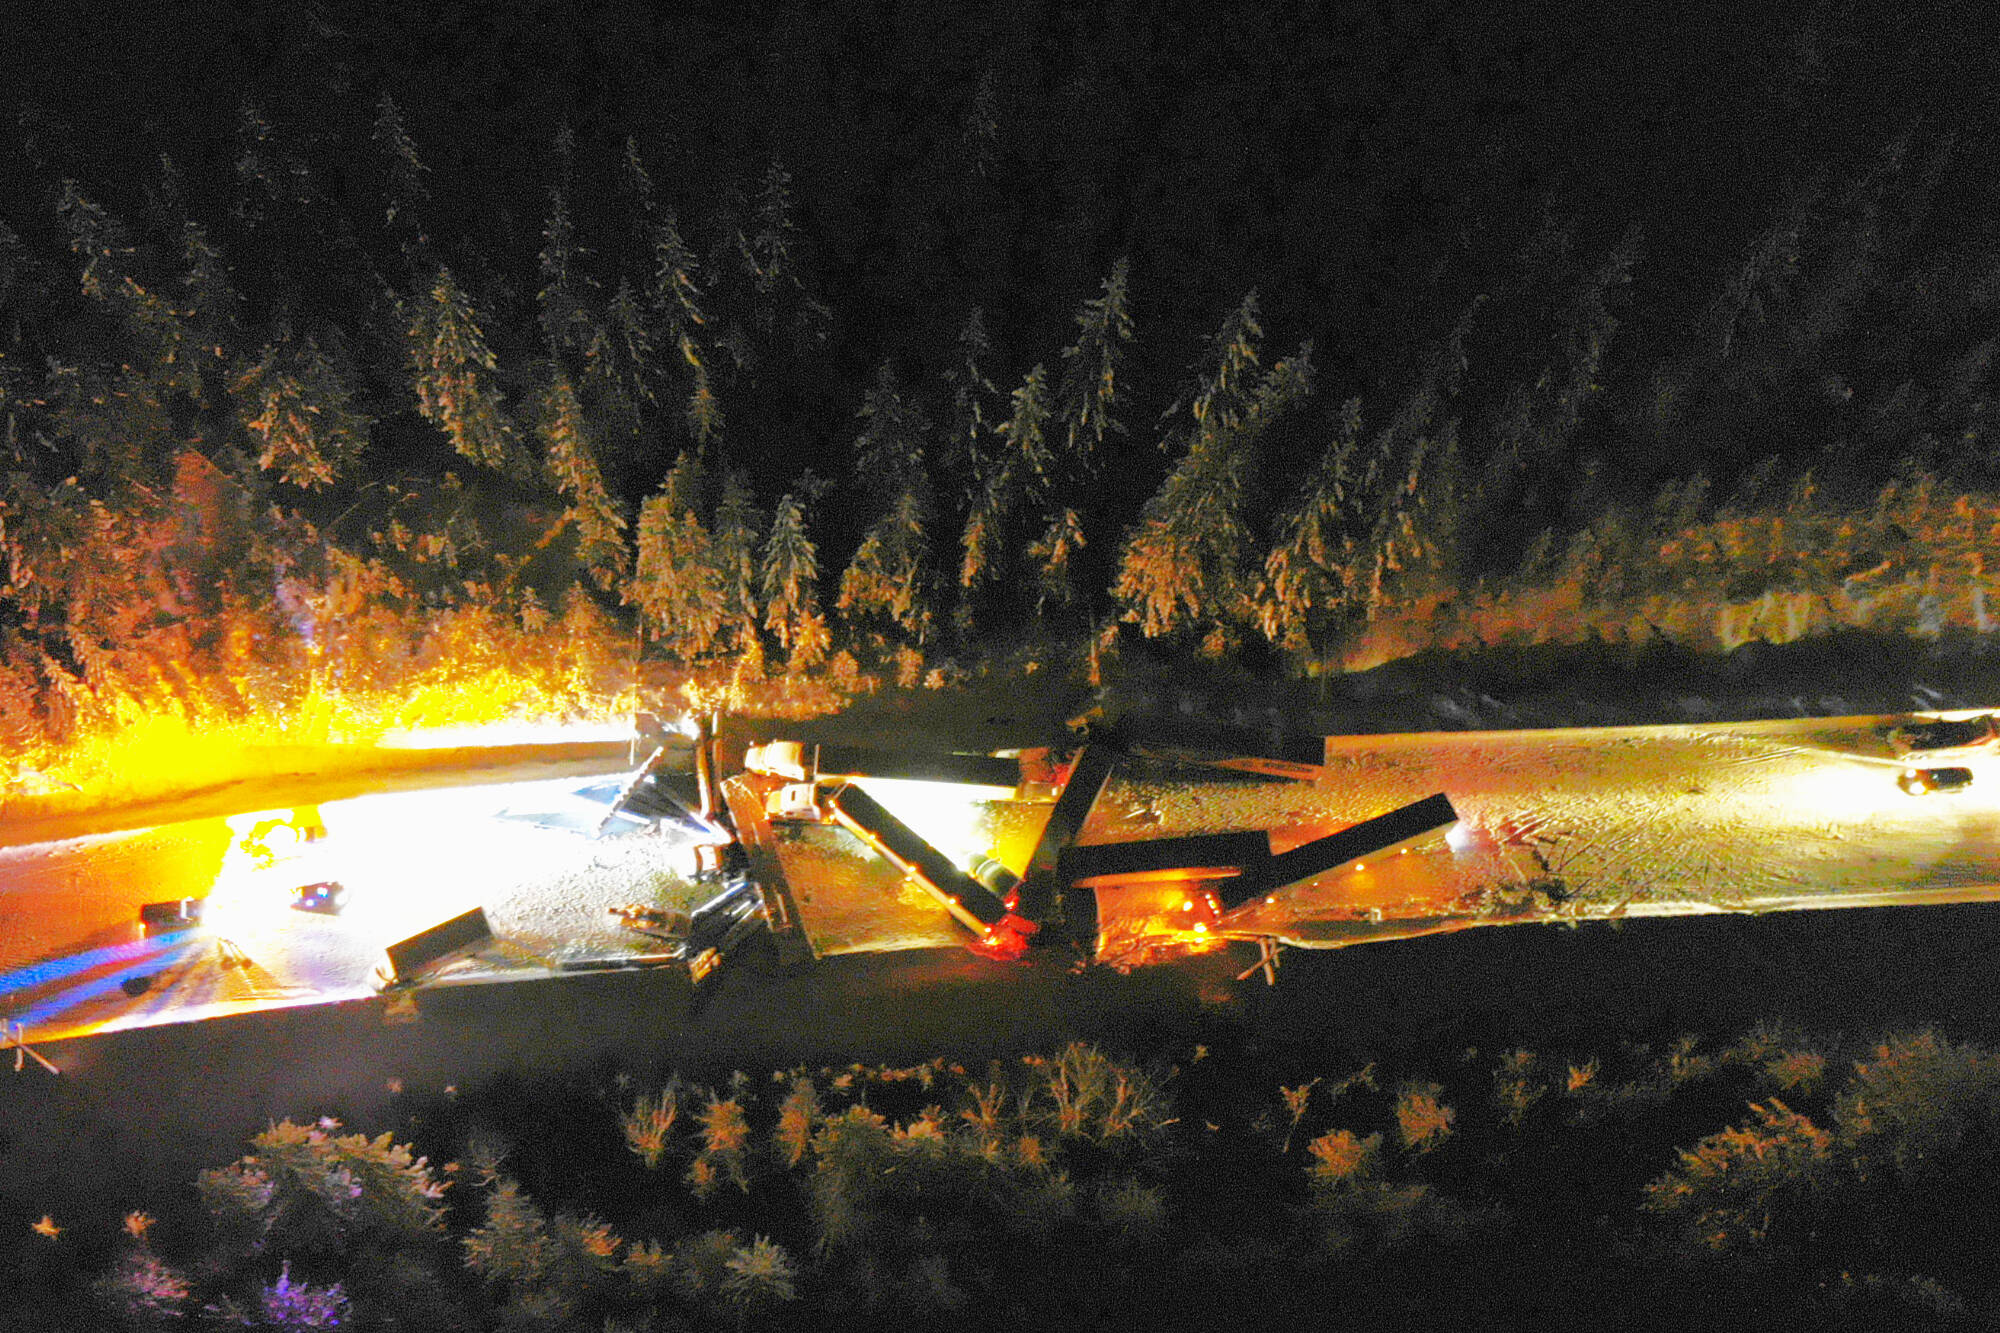 Several commercial tractor trailer units can be seen in this RCMP drone image of the Saturday, Jan. 8 collision on Highway 1 between Sicamous and Salmon Arm. Police are seeking more information about the incident that resulted in the death of one person and sent six others to hospital. (RCMP photo)